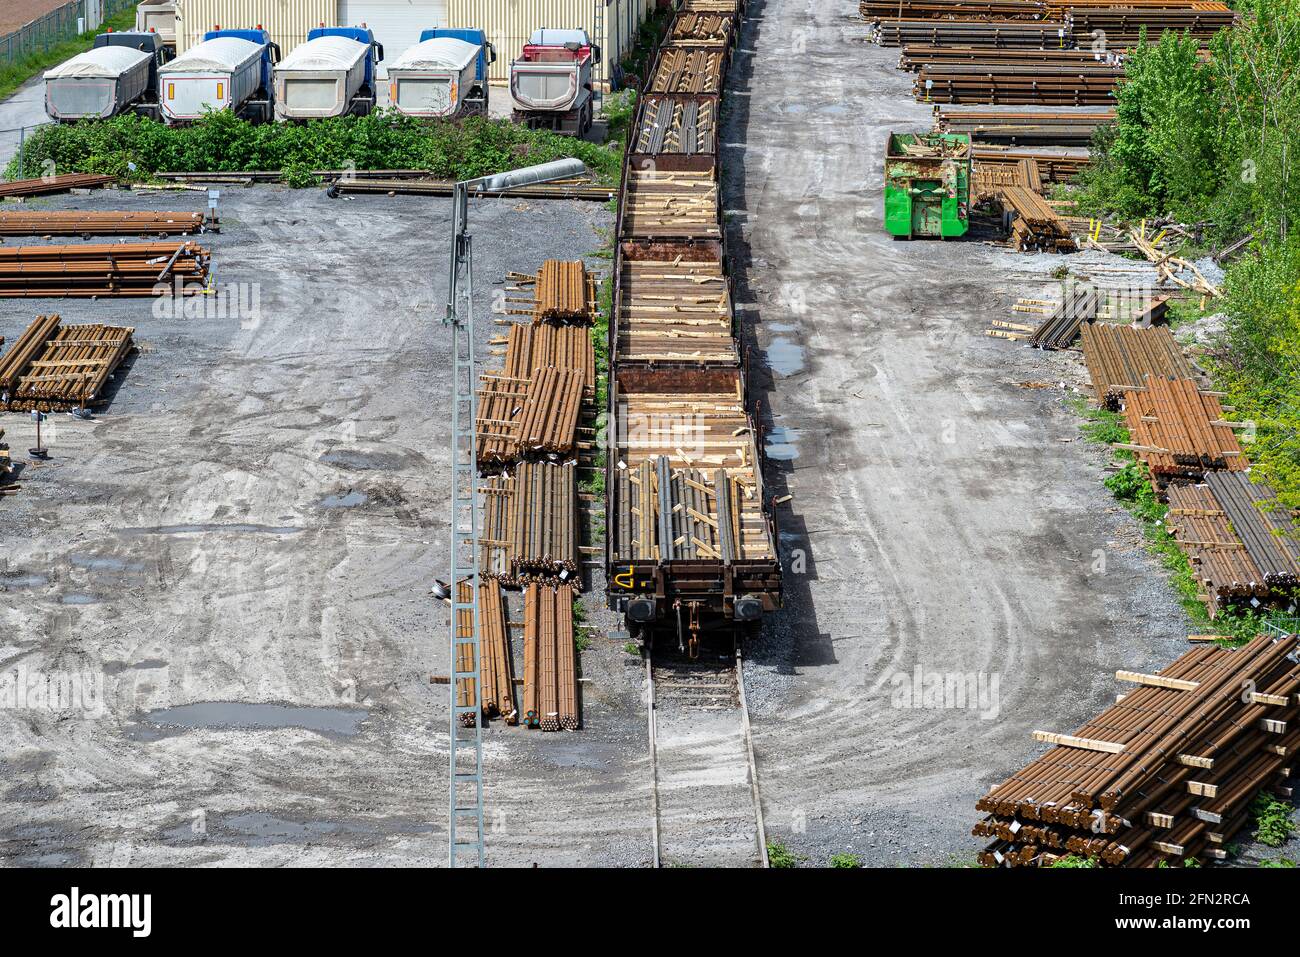 Long and thick, rust-covered steel bars stacked outside on a gravel square, visible railroad tracks and wagons, viewed from above. Stock Photo